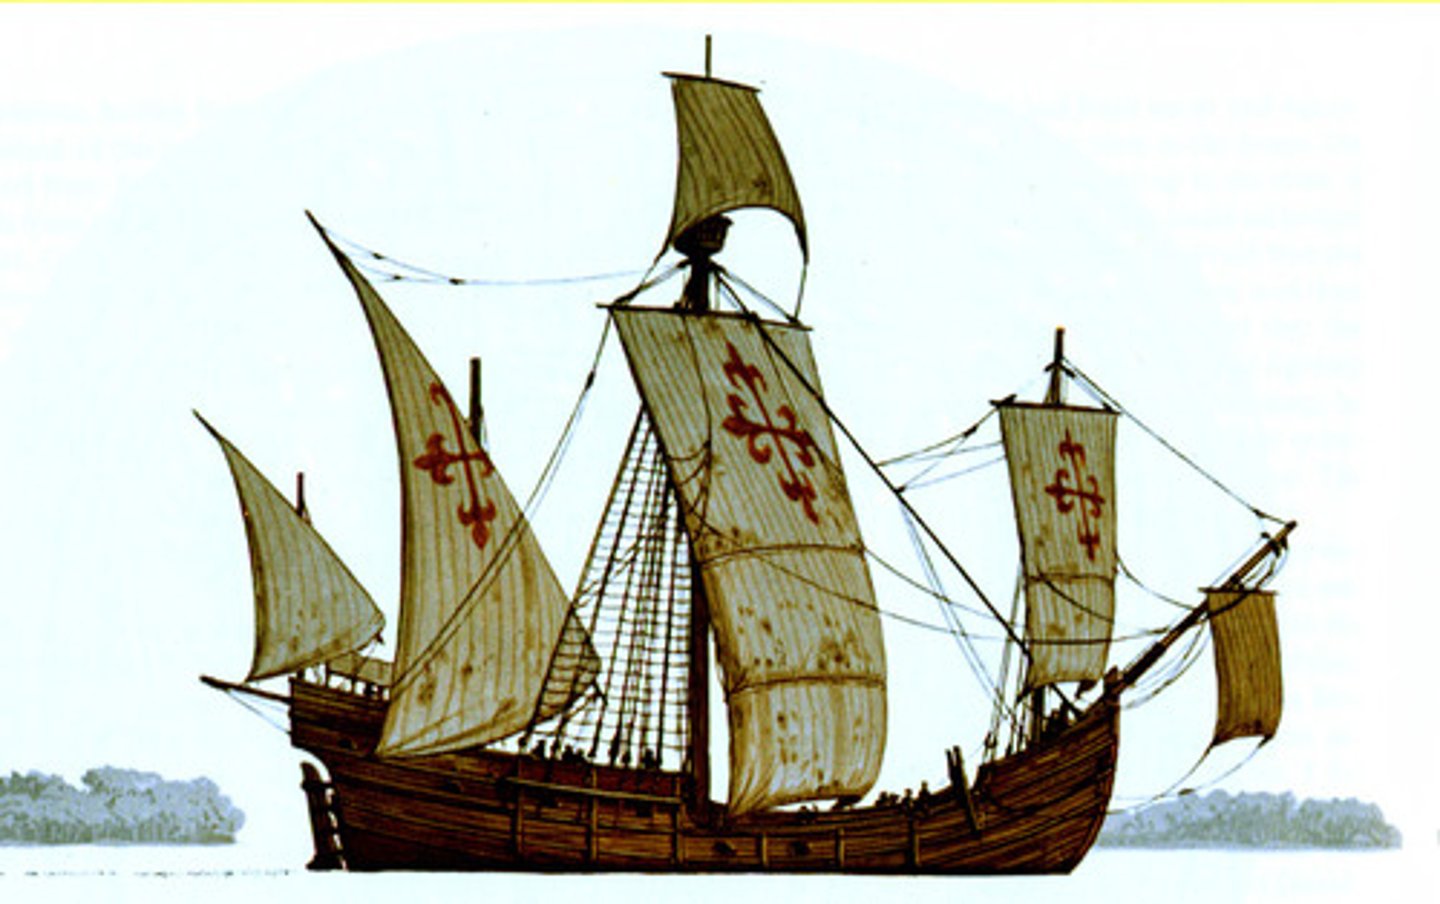 <p>A small, maneuverable, three-mast sailing ship developed by the Portuguese in the 15th c. that gave the Portuguese a distinct advantage in exploration and trade.</p>